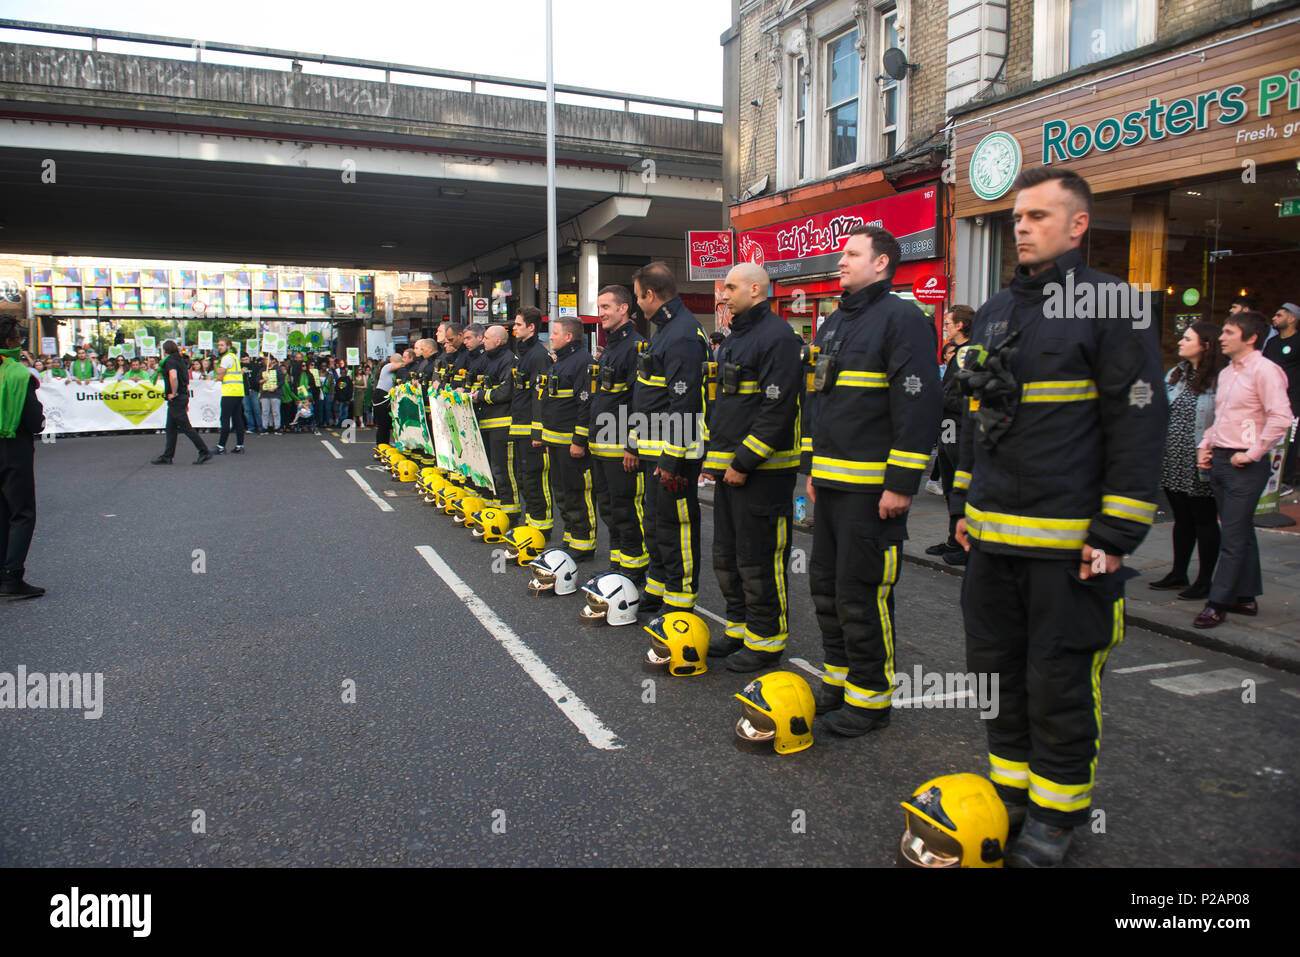 London, England. 14th June 2018. People stop to hug / greet firefighters during a silent march. Grenfell Tower fire Silent walk is held to mark the first anniversary of the Grenfell Tower fire, which claimed the lives of 72 people. ©Michael Tubi/Alamy Live News Stock Photo